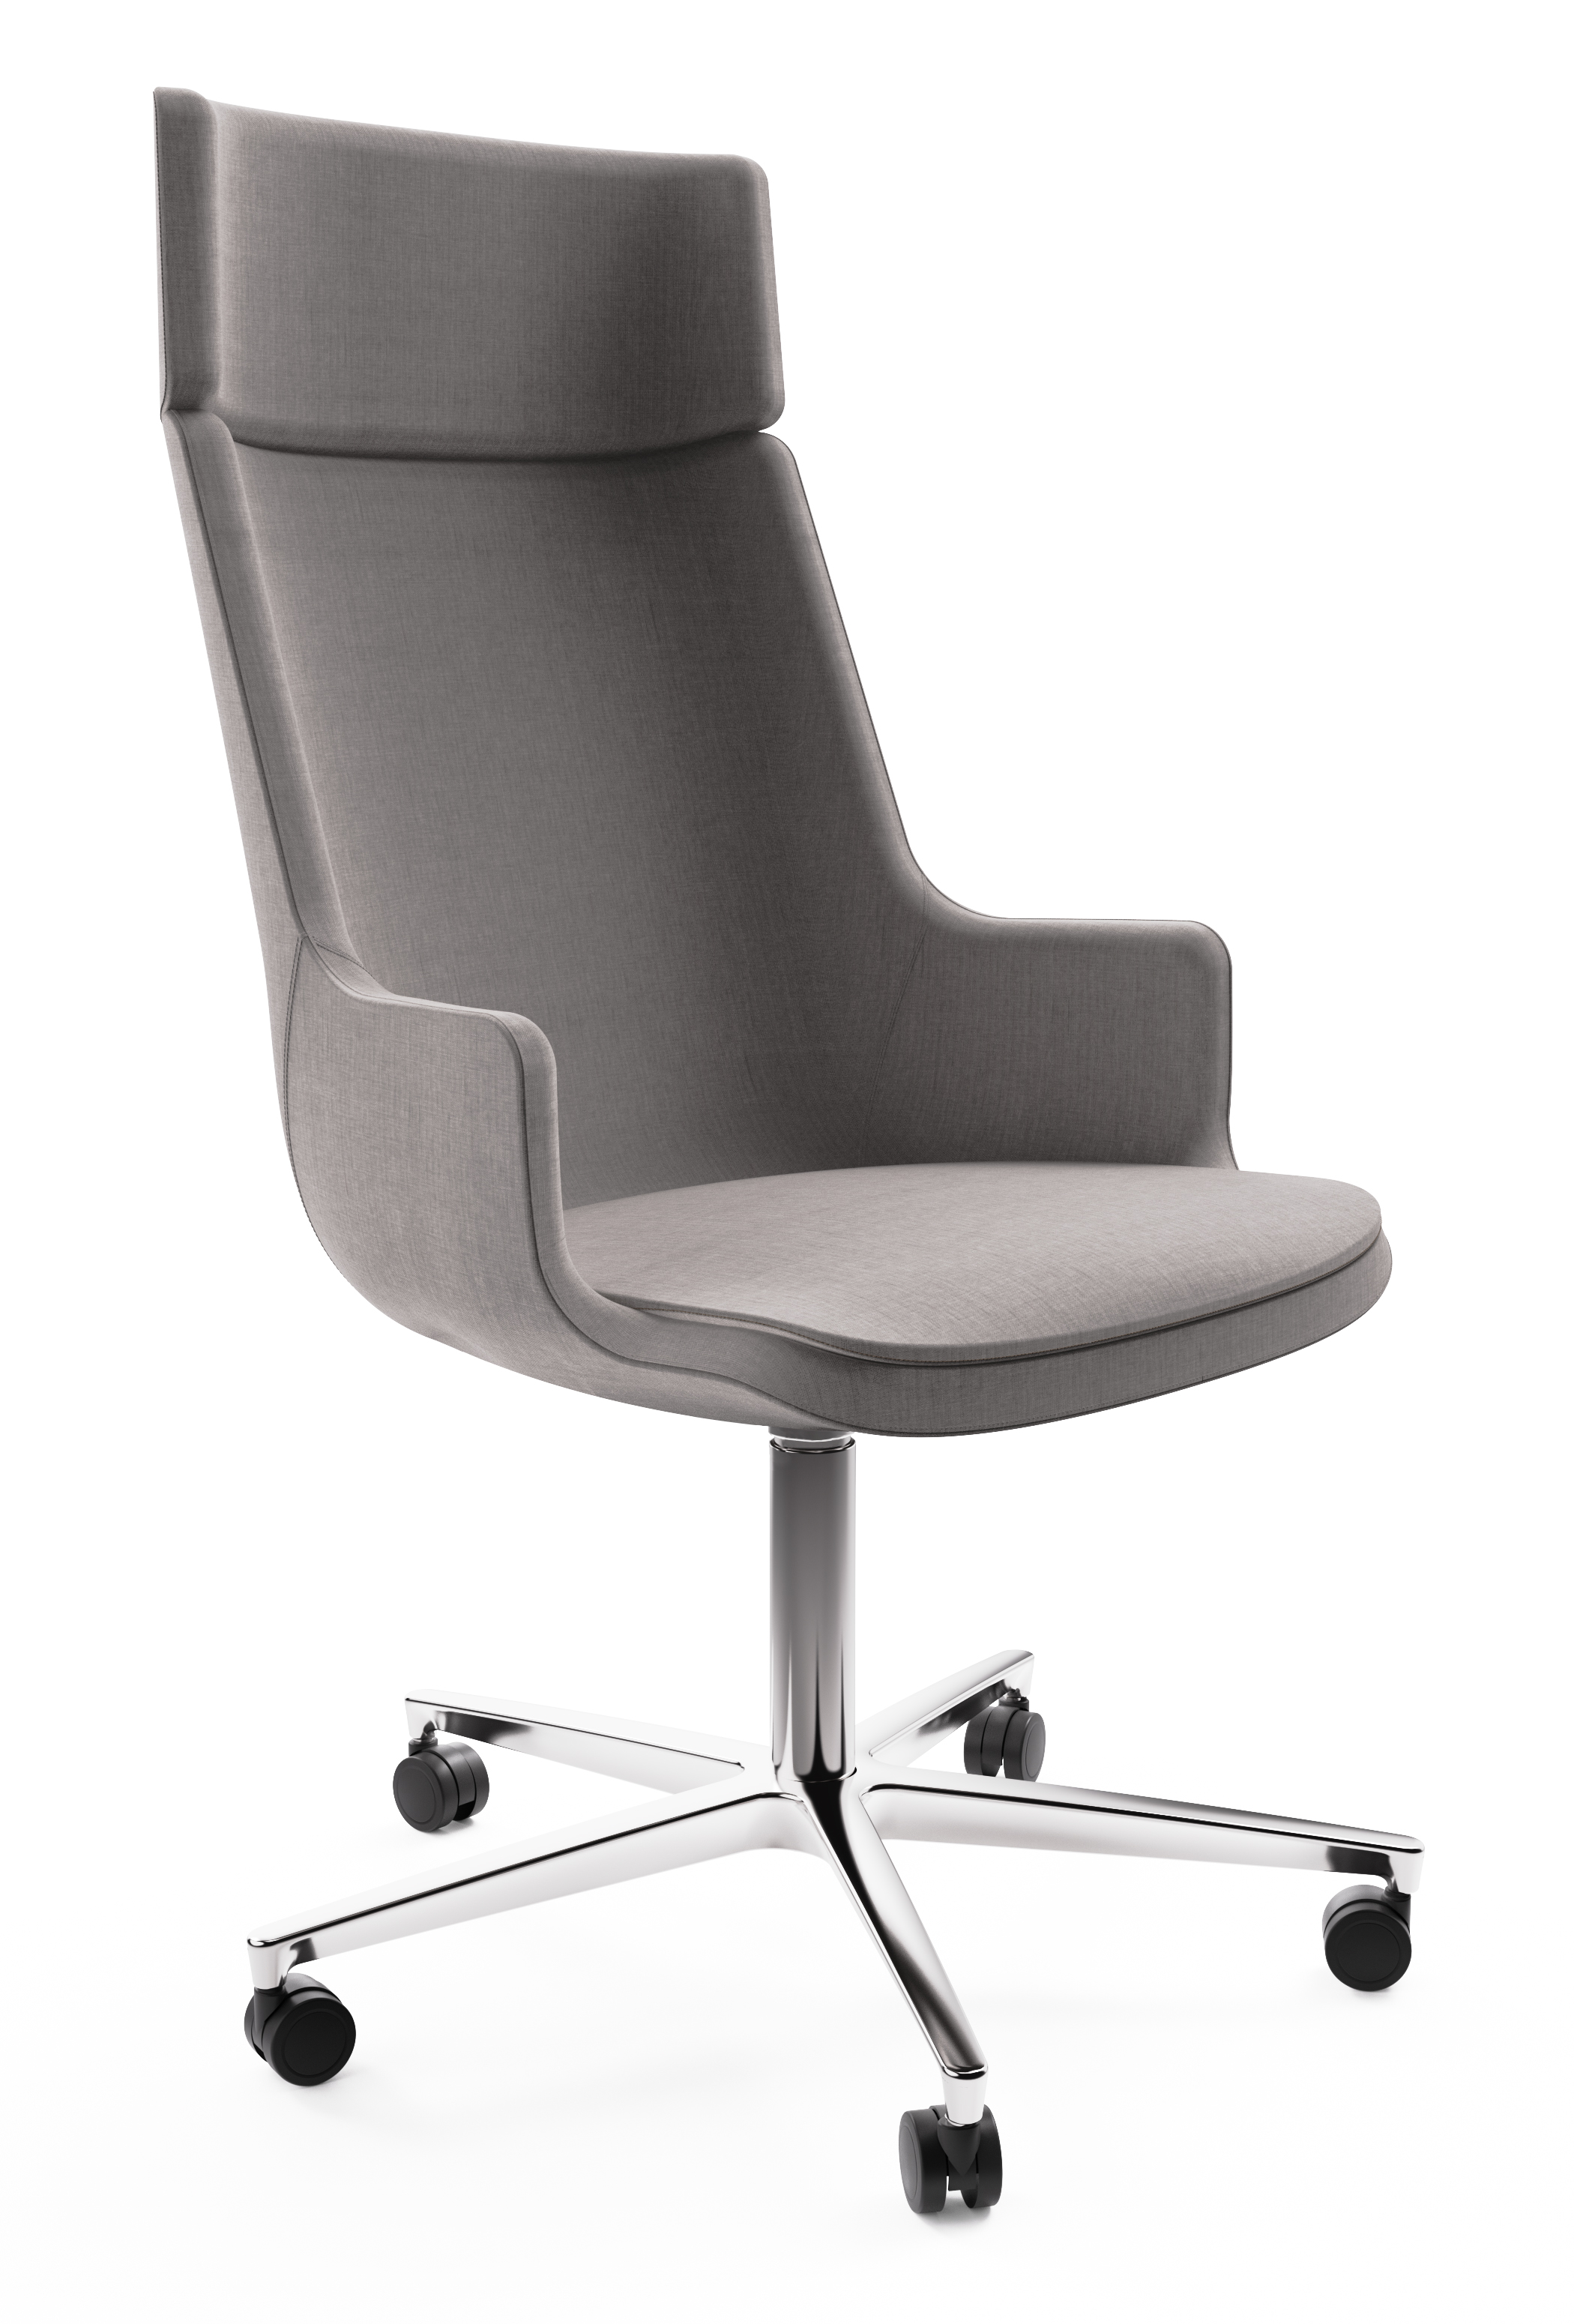 WS - Contour chair - High, 5 star castor polished base (Front angle)